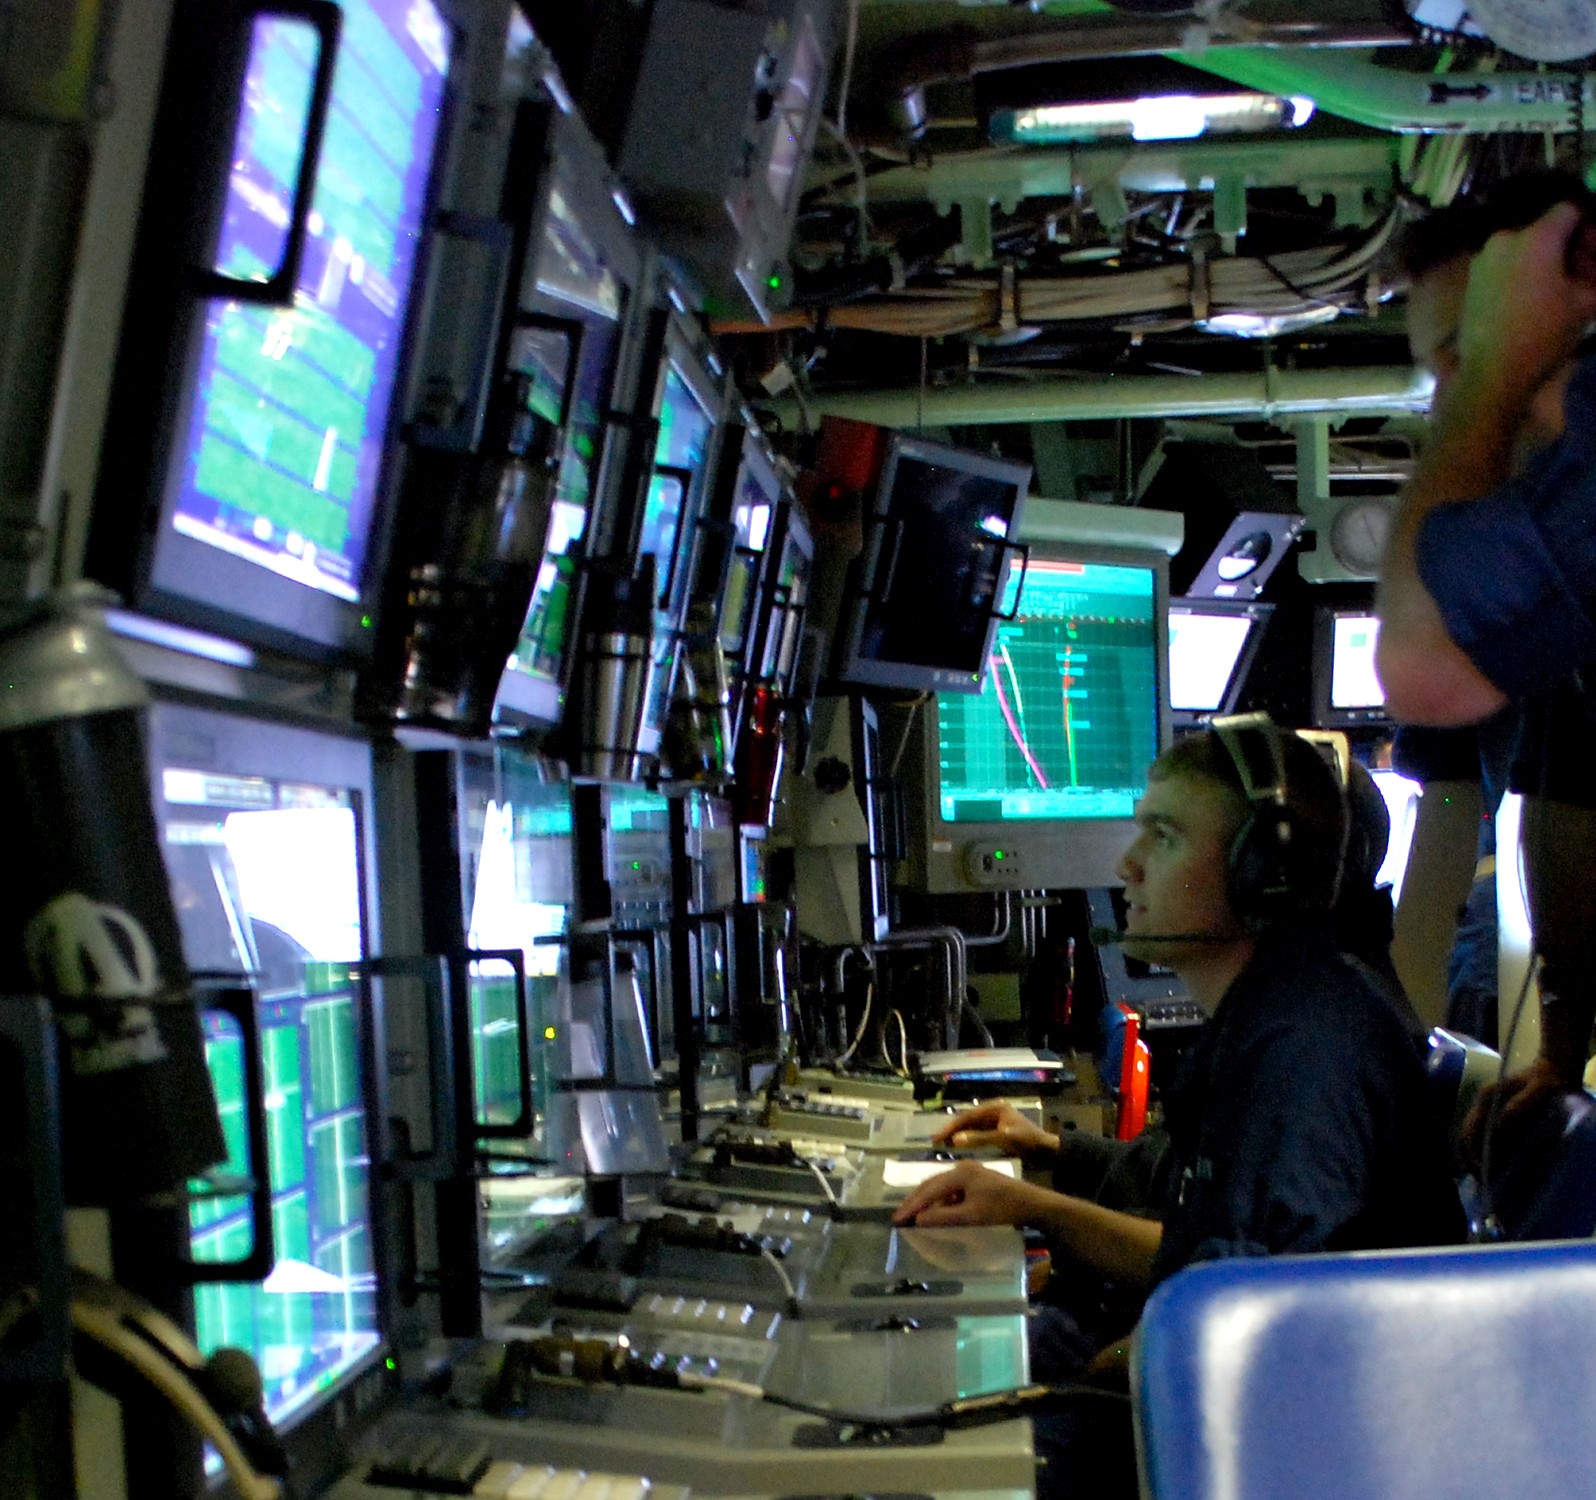 virginia class attack submarine ssn us navy inside view 11x control room console